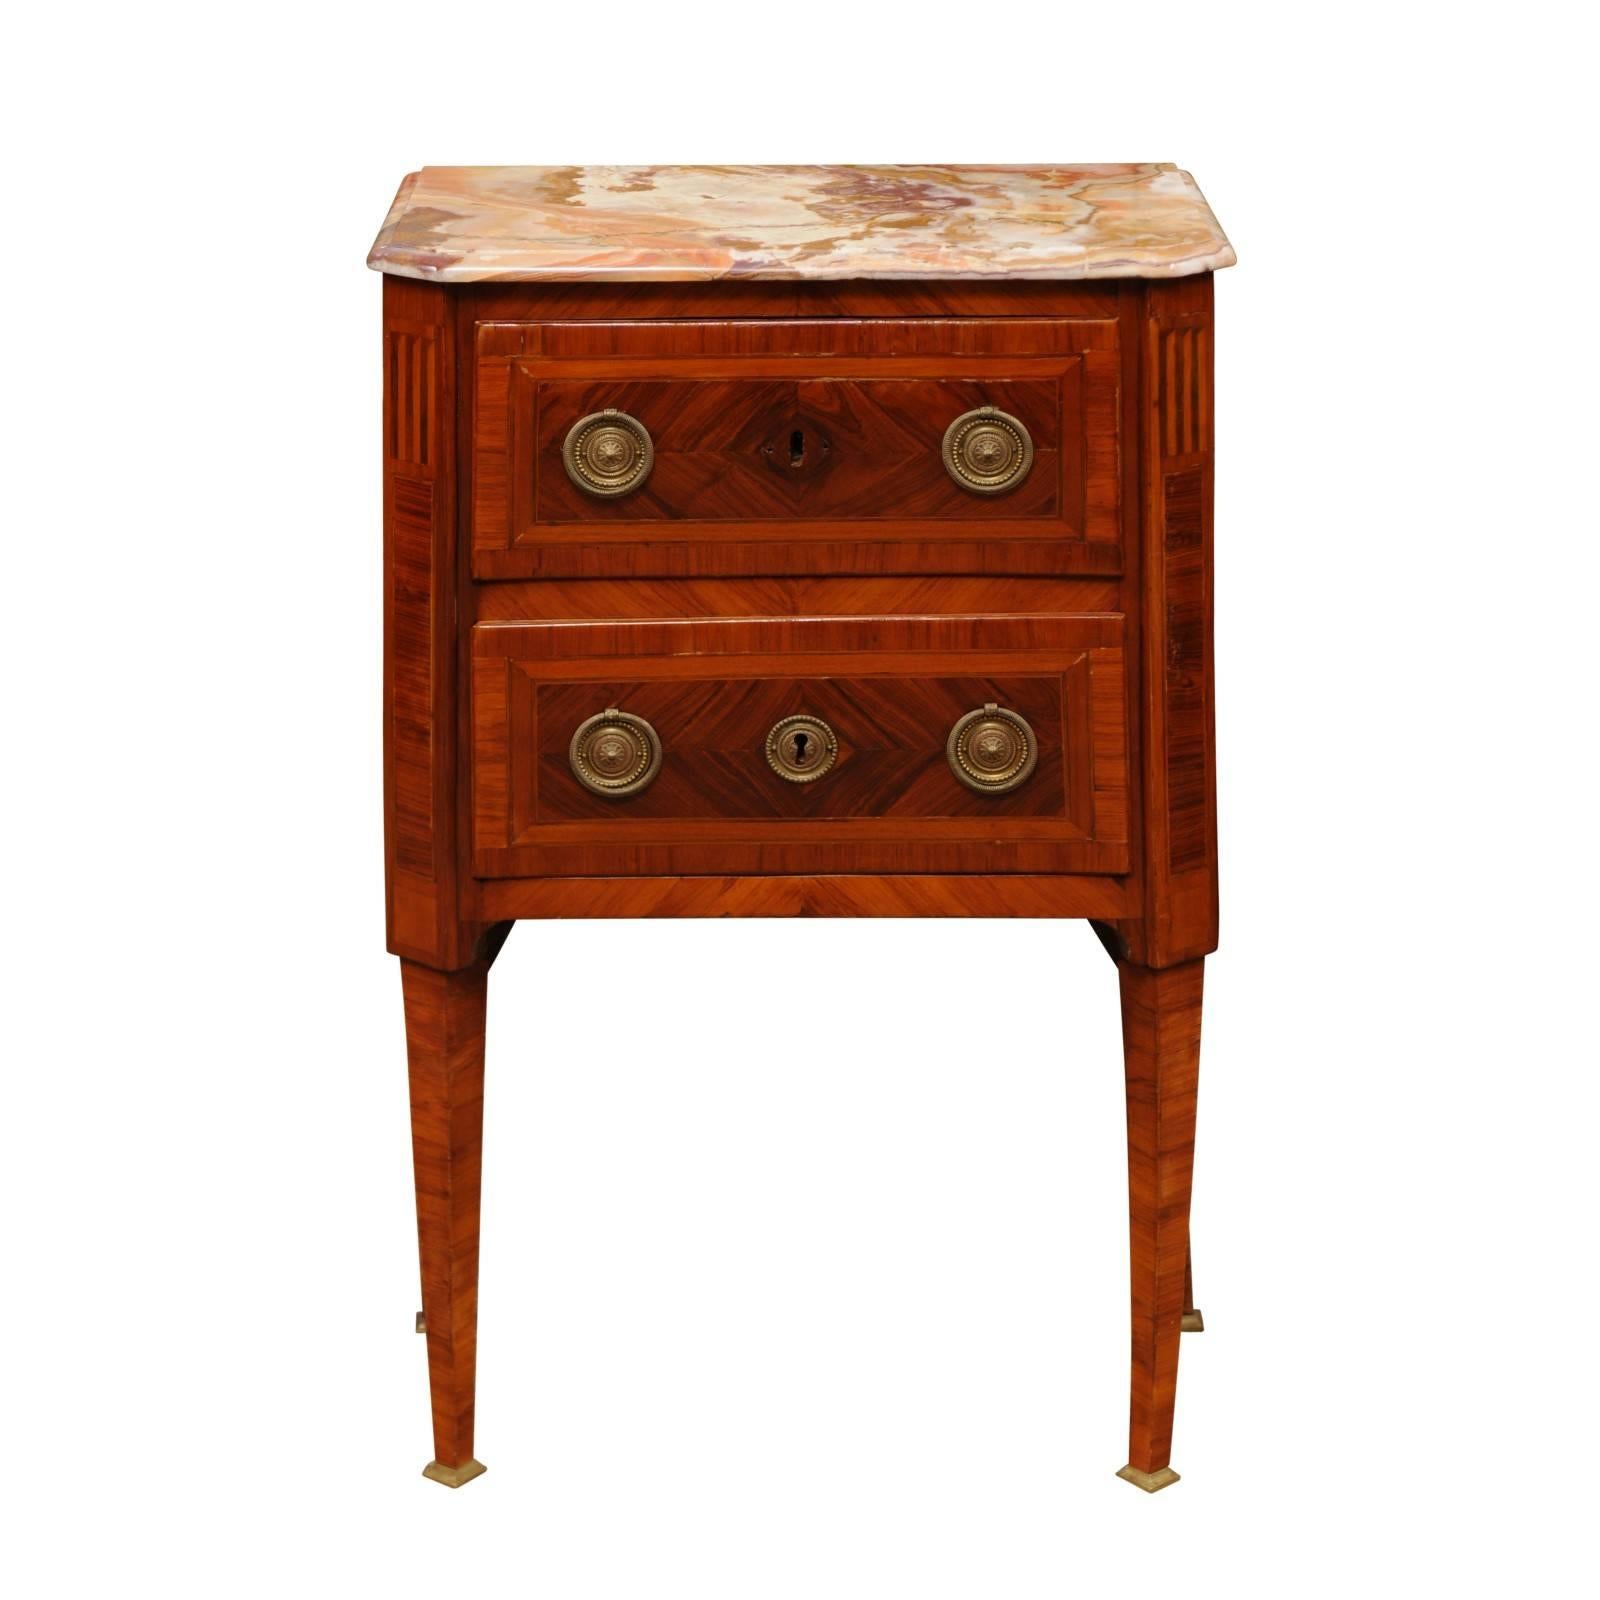 French Louis XVI Inlaid Petite Commode in Kingswood, Late 18th Century